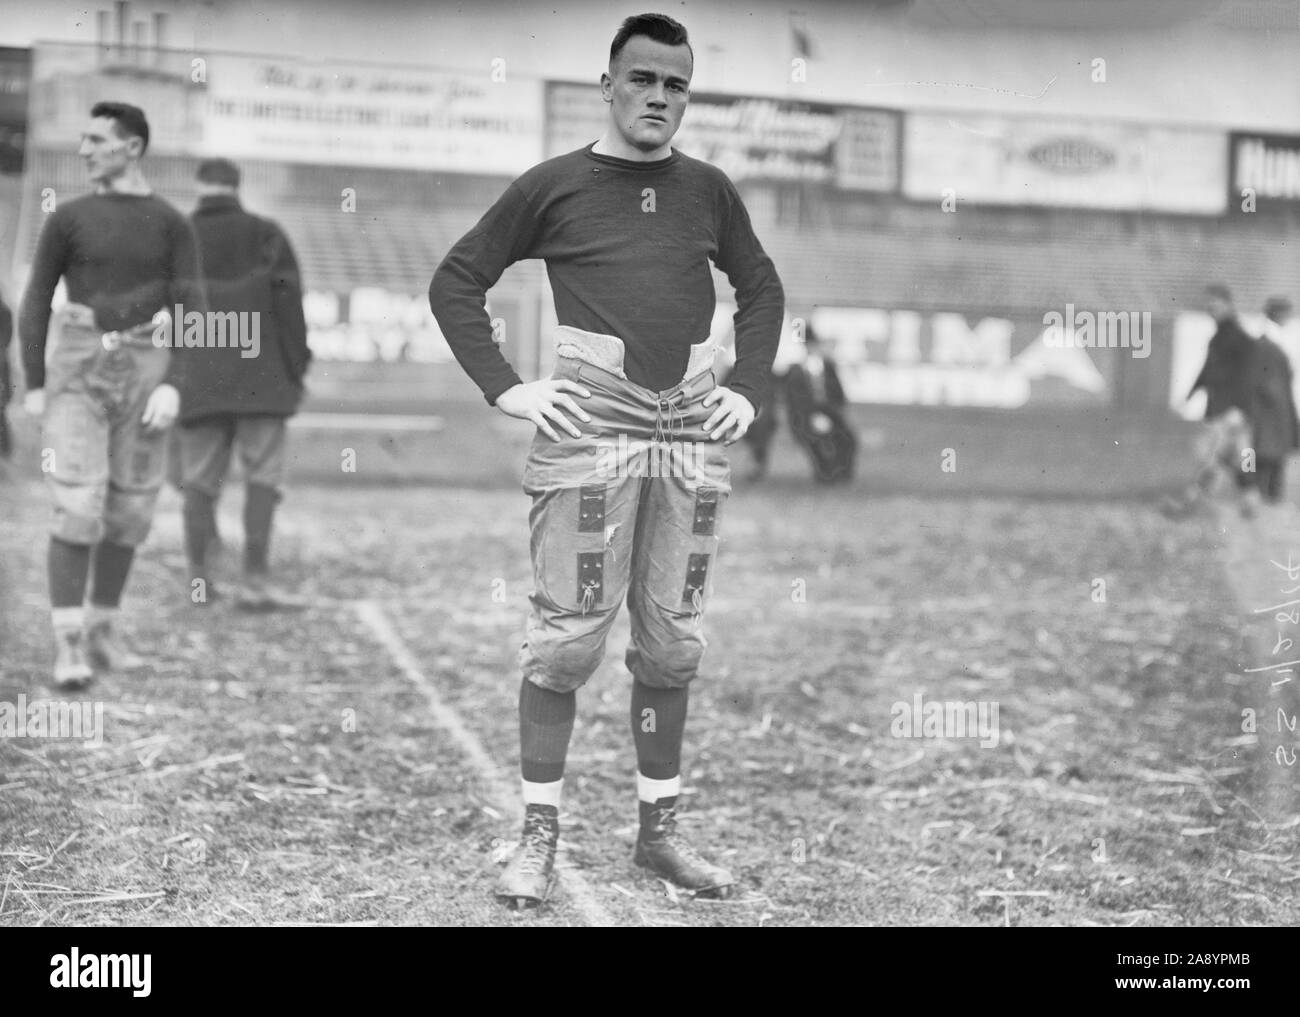 Photograph shows Burleigh Cruikshank, an All-American football player for Washington & Jefferson College, before a football game against Rutgers University at the Polo Grounds in New York City on November 28, 1914 Stock Photo